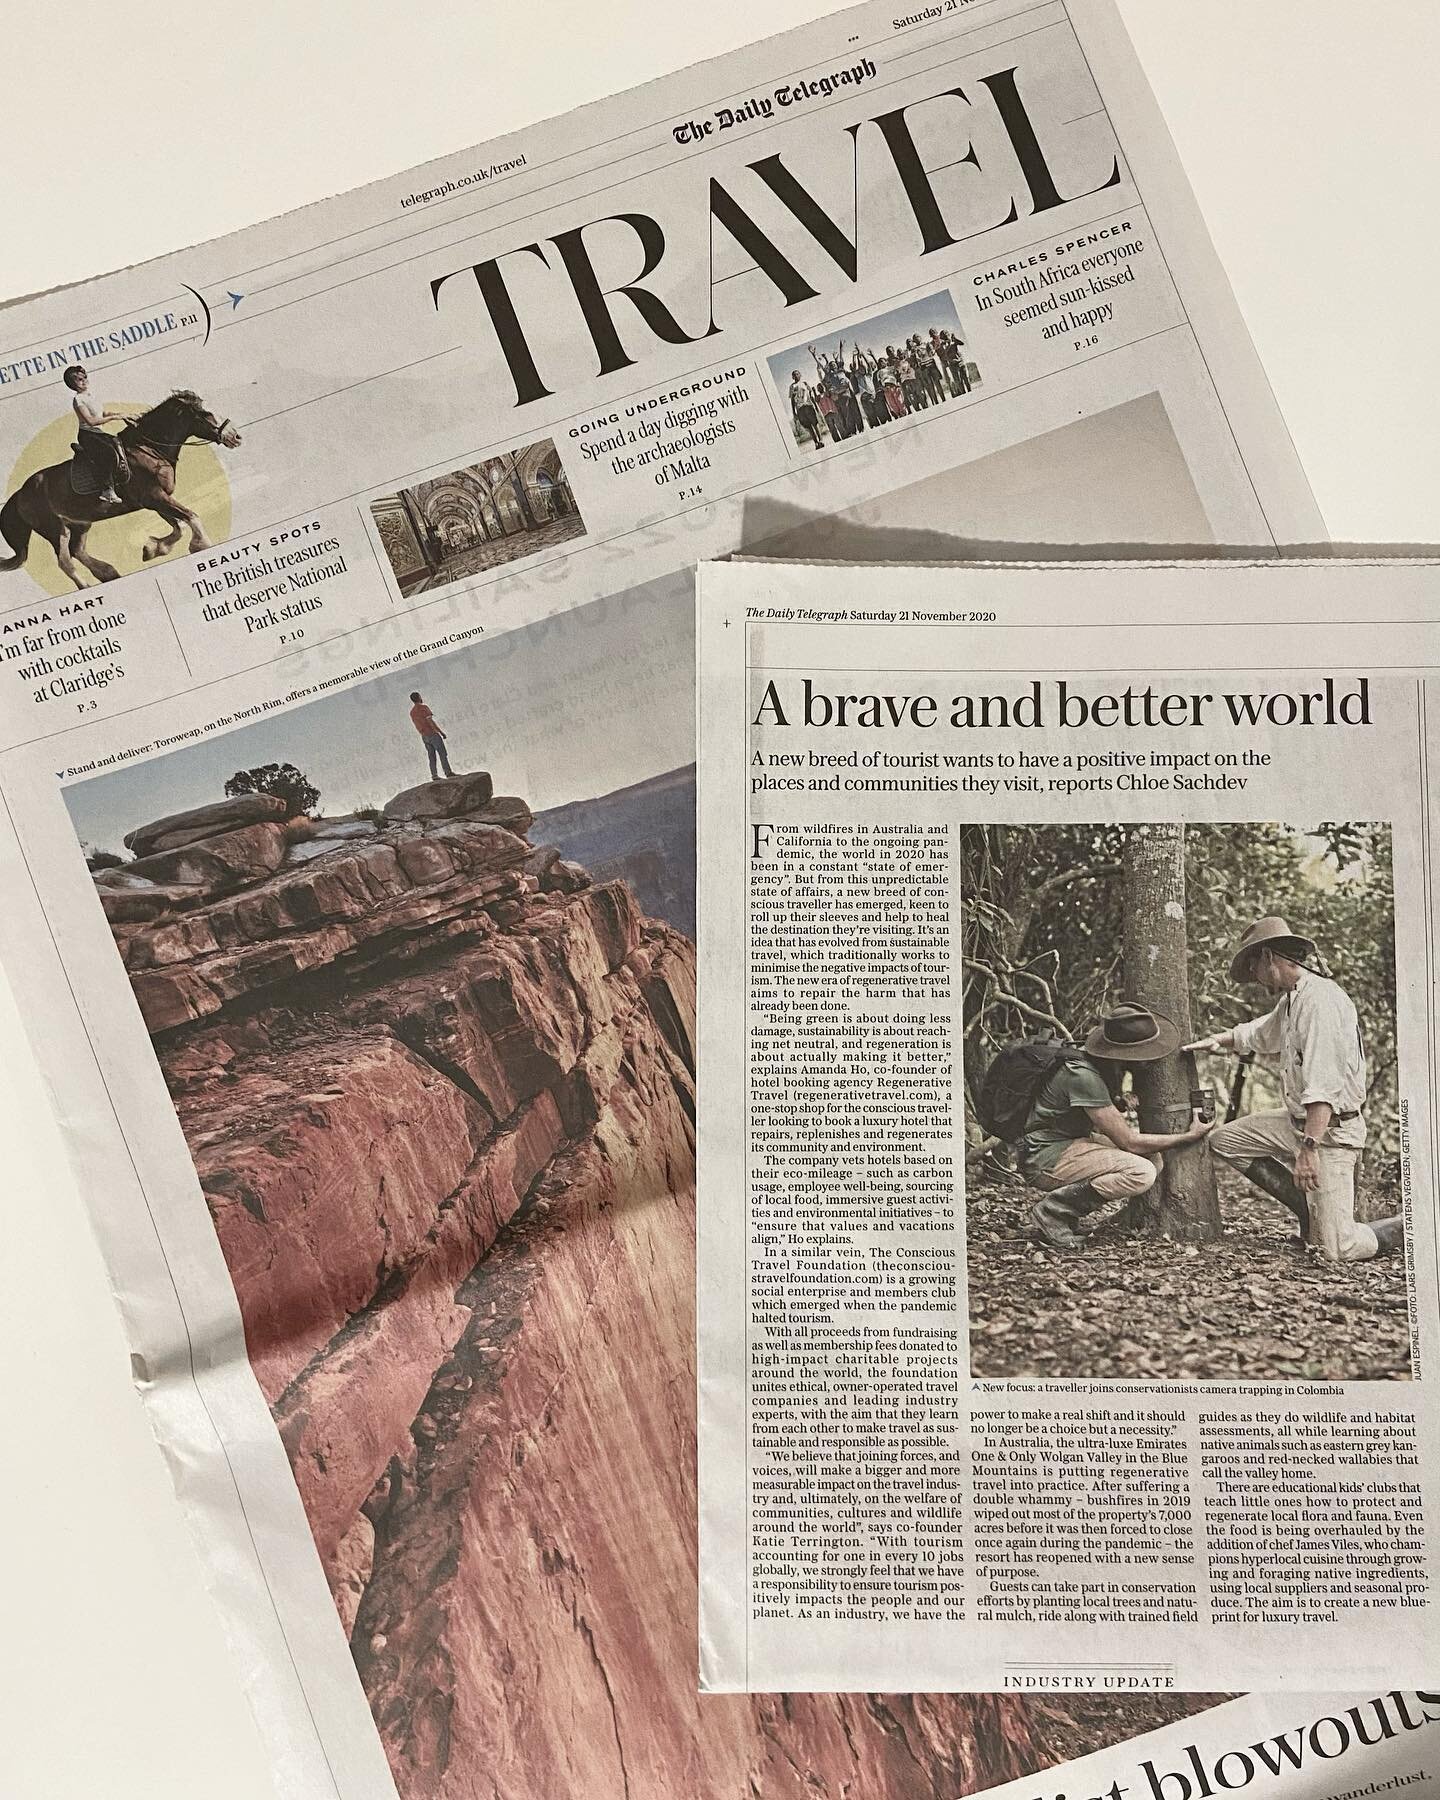 I&rsquo;m really proud of @theconscioustravelfoundation being featured in today&rsquo;s Travel section of @telegraph alongside @regenerativetravel and @wolganv ✨

Thank you so much @chloesachdev for featuring us in your article &lsquo;A Brave and Bet